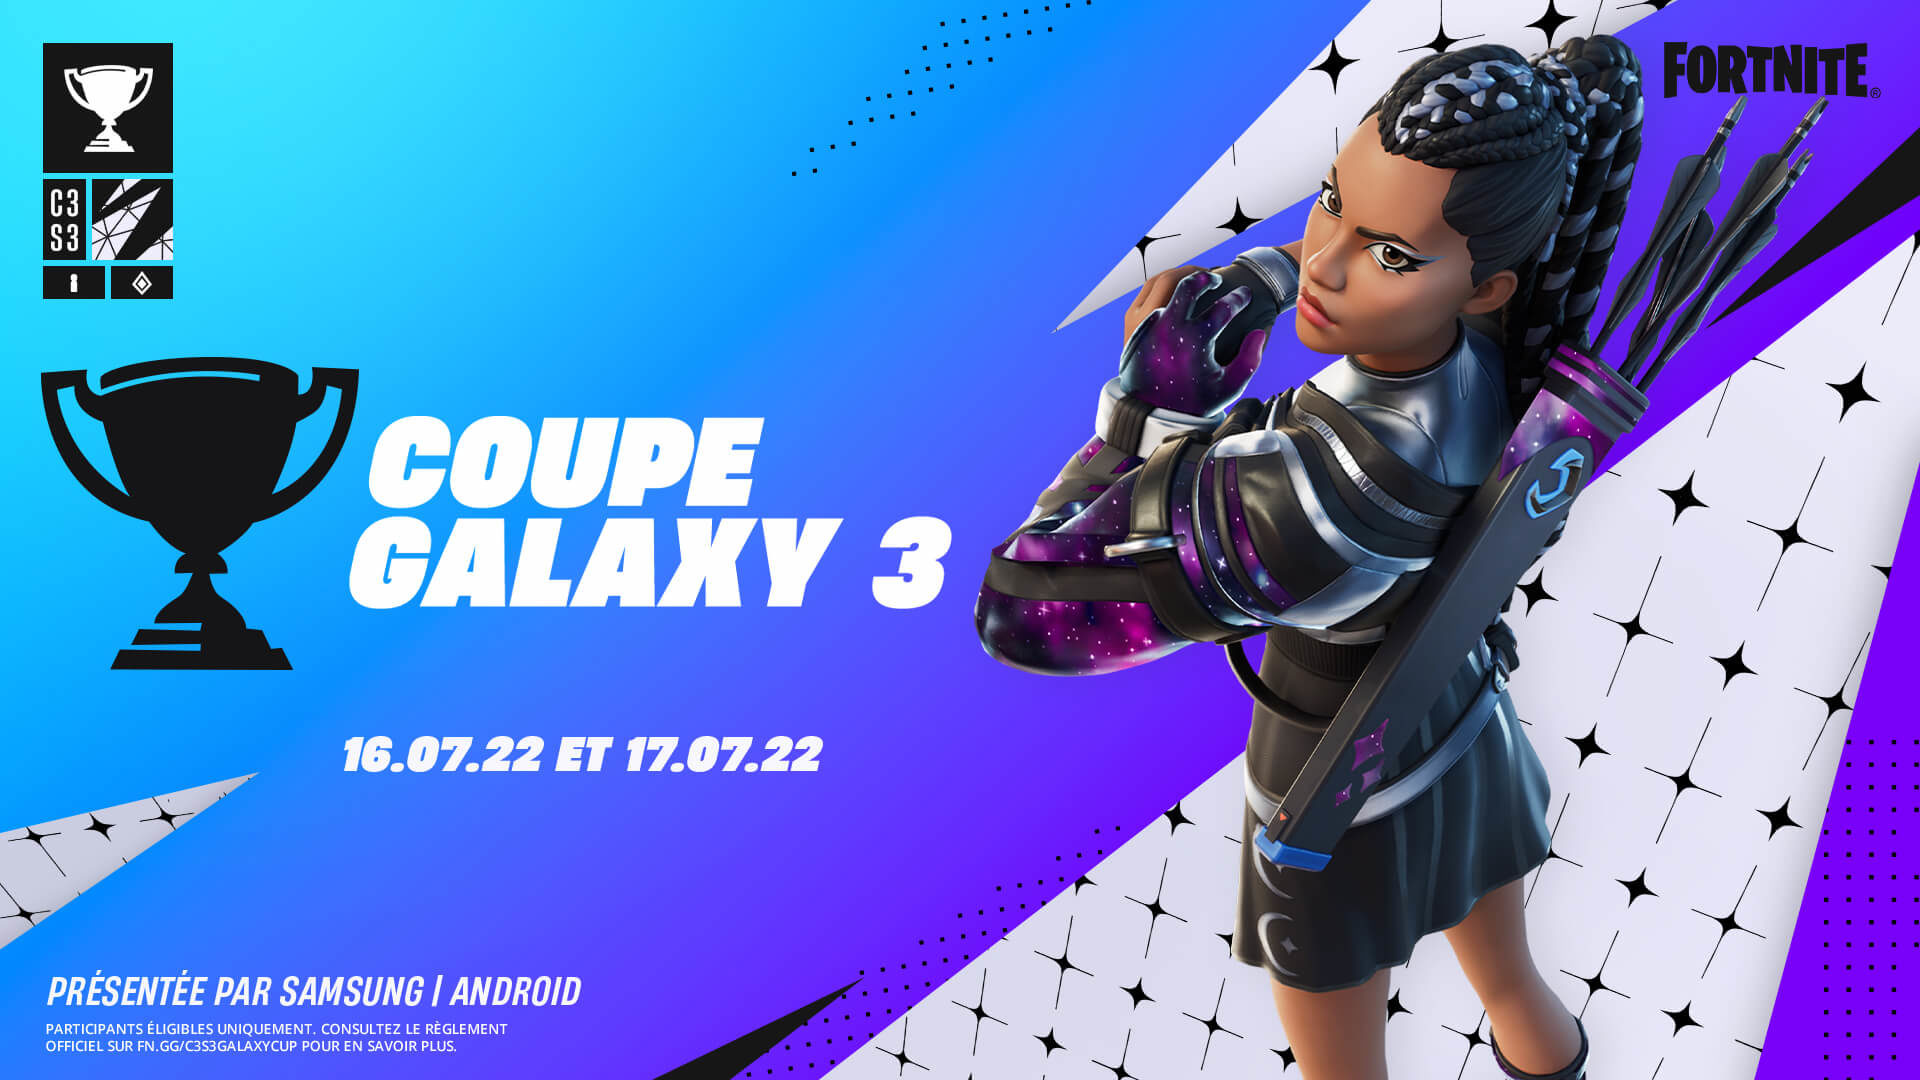 Fortnite is hosting the Galaxy Cup 3 this weekend, only on Android

